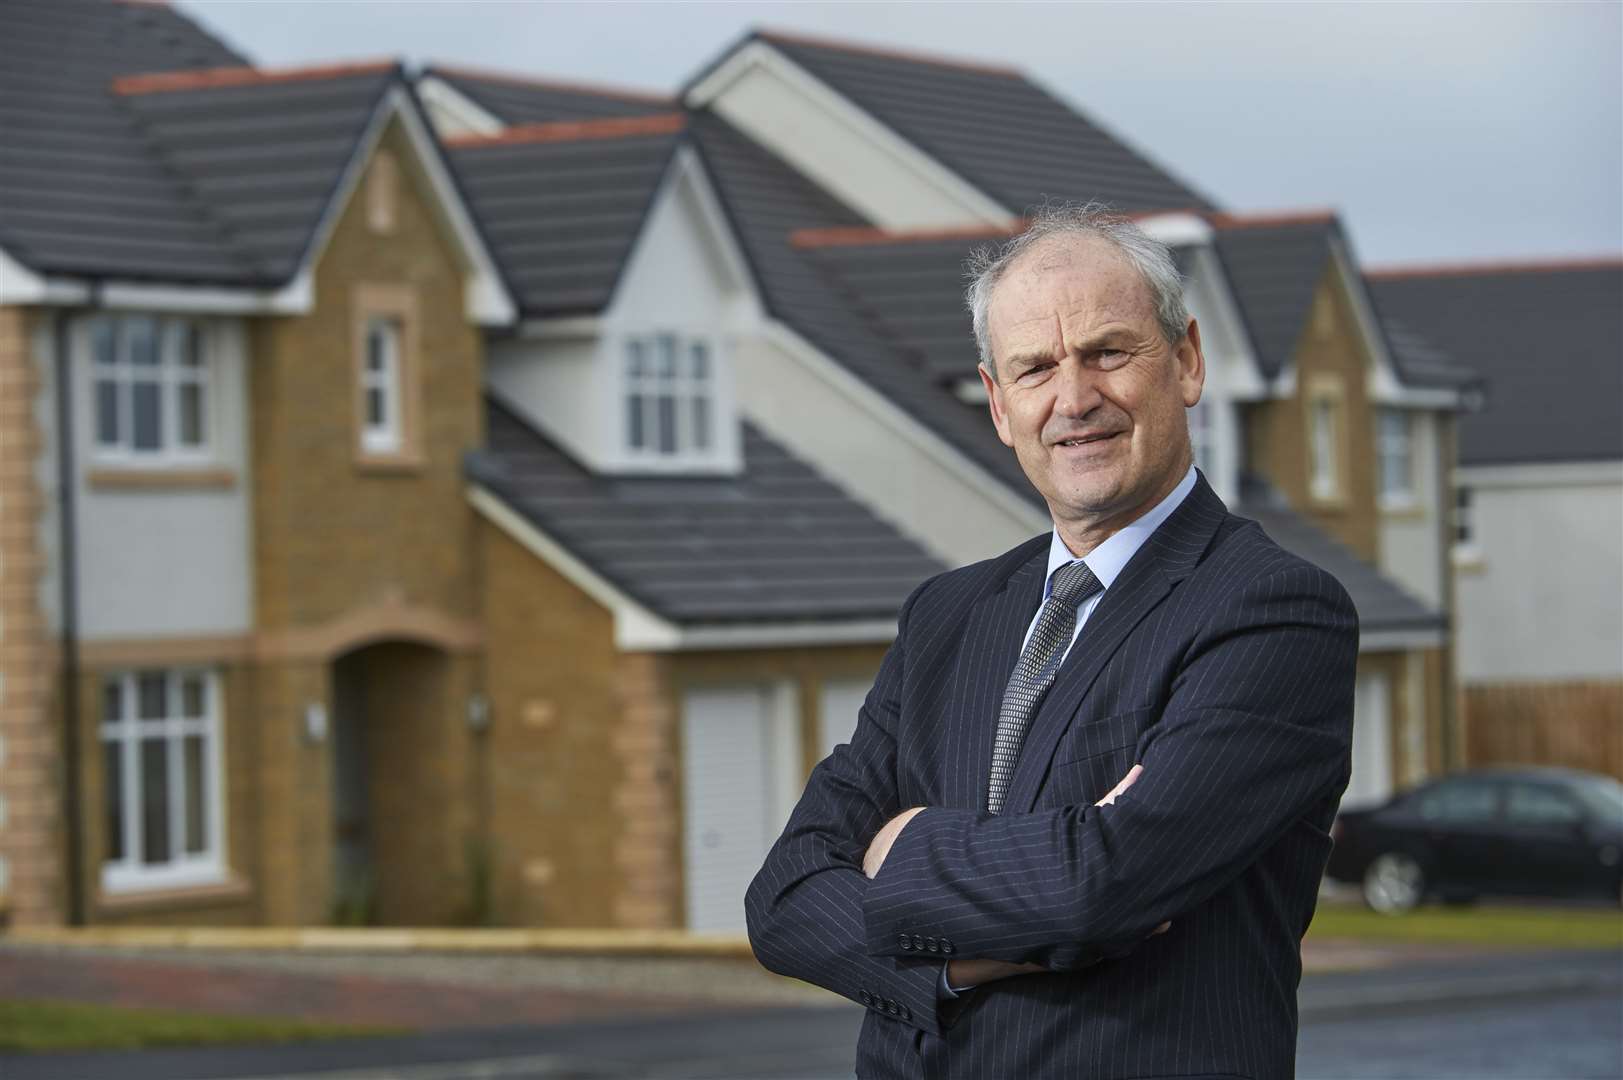 Chief Exec of Tulloch Homes, George Fraser, pictured at an Inverness developments.